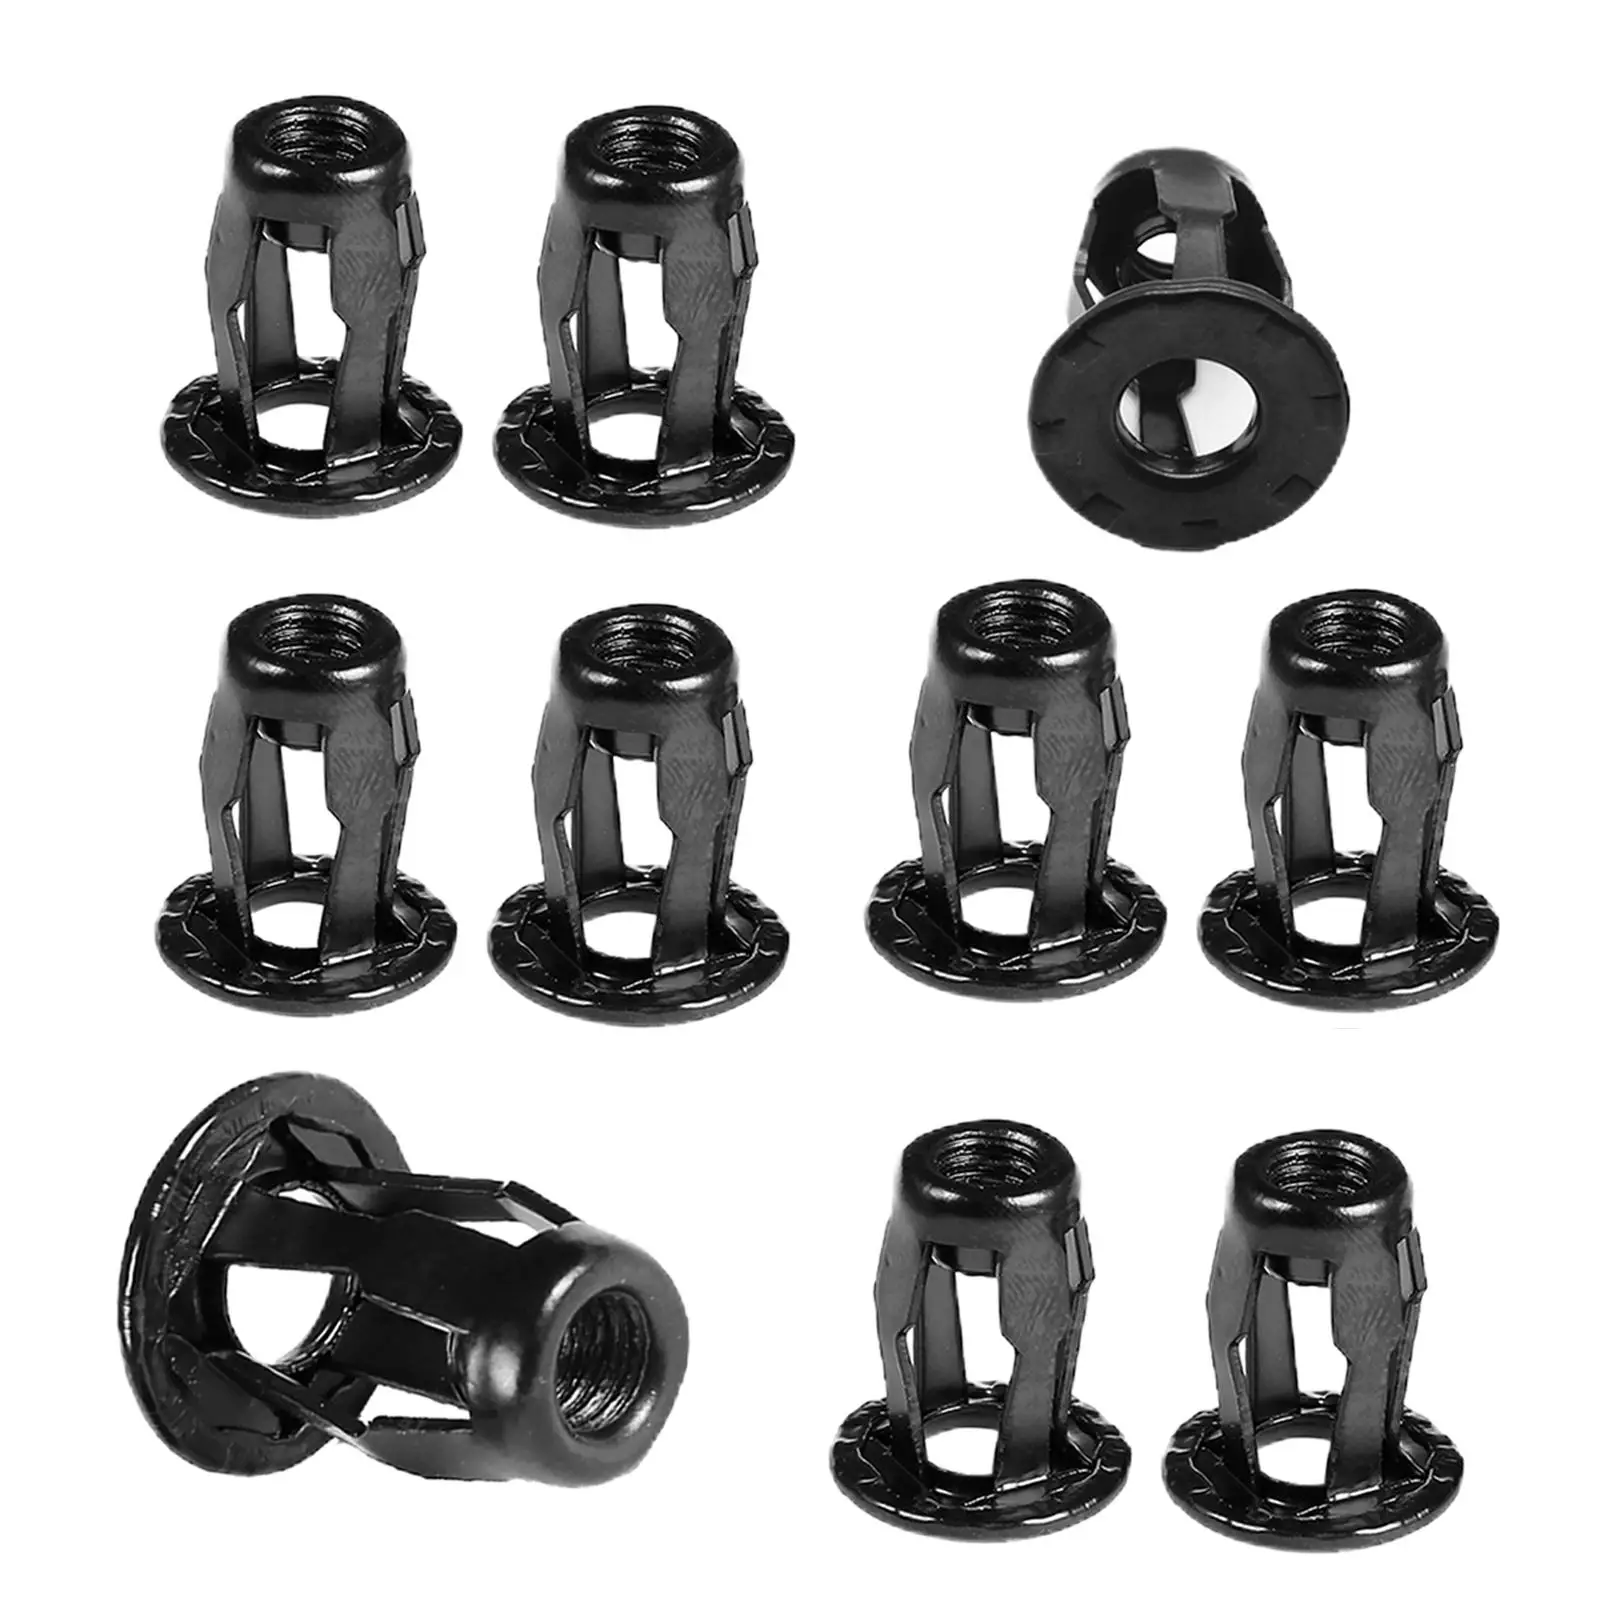 10x Car Screw Base Clamp Trunk Nuts Car Accessories Replacement Front Rear